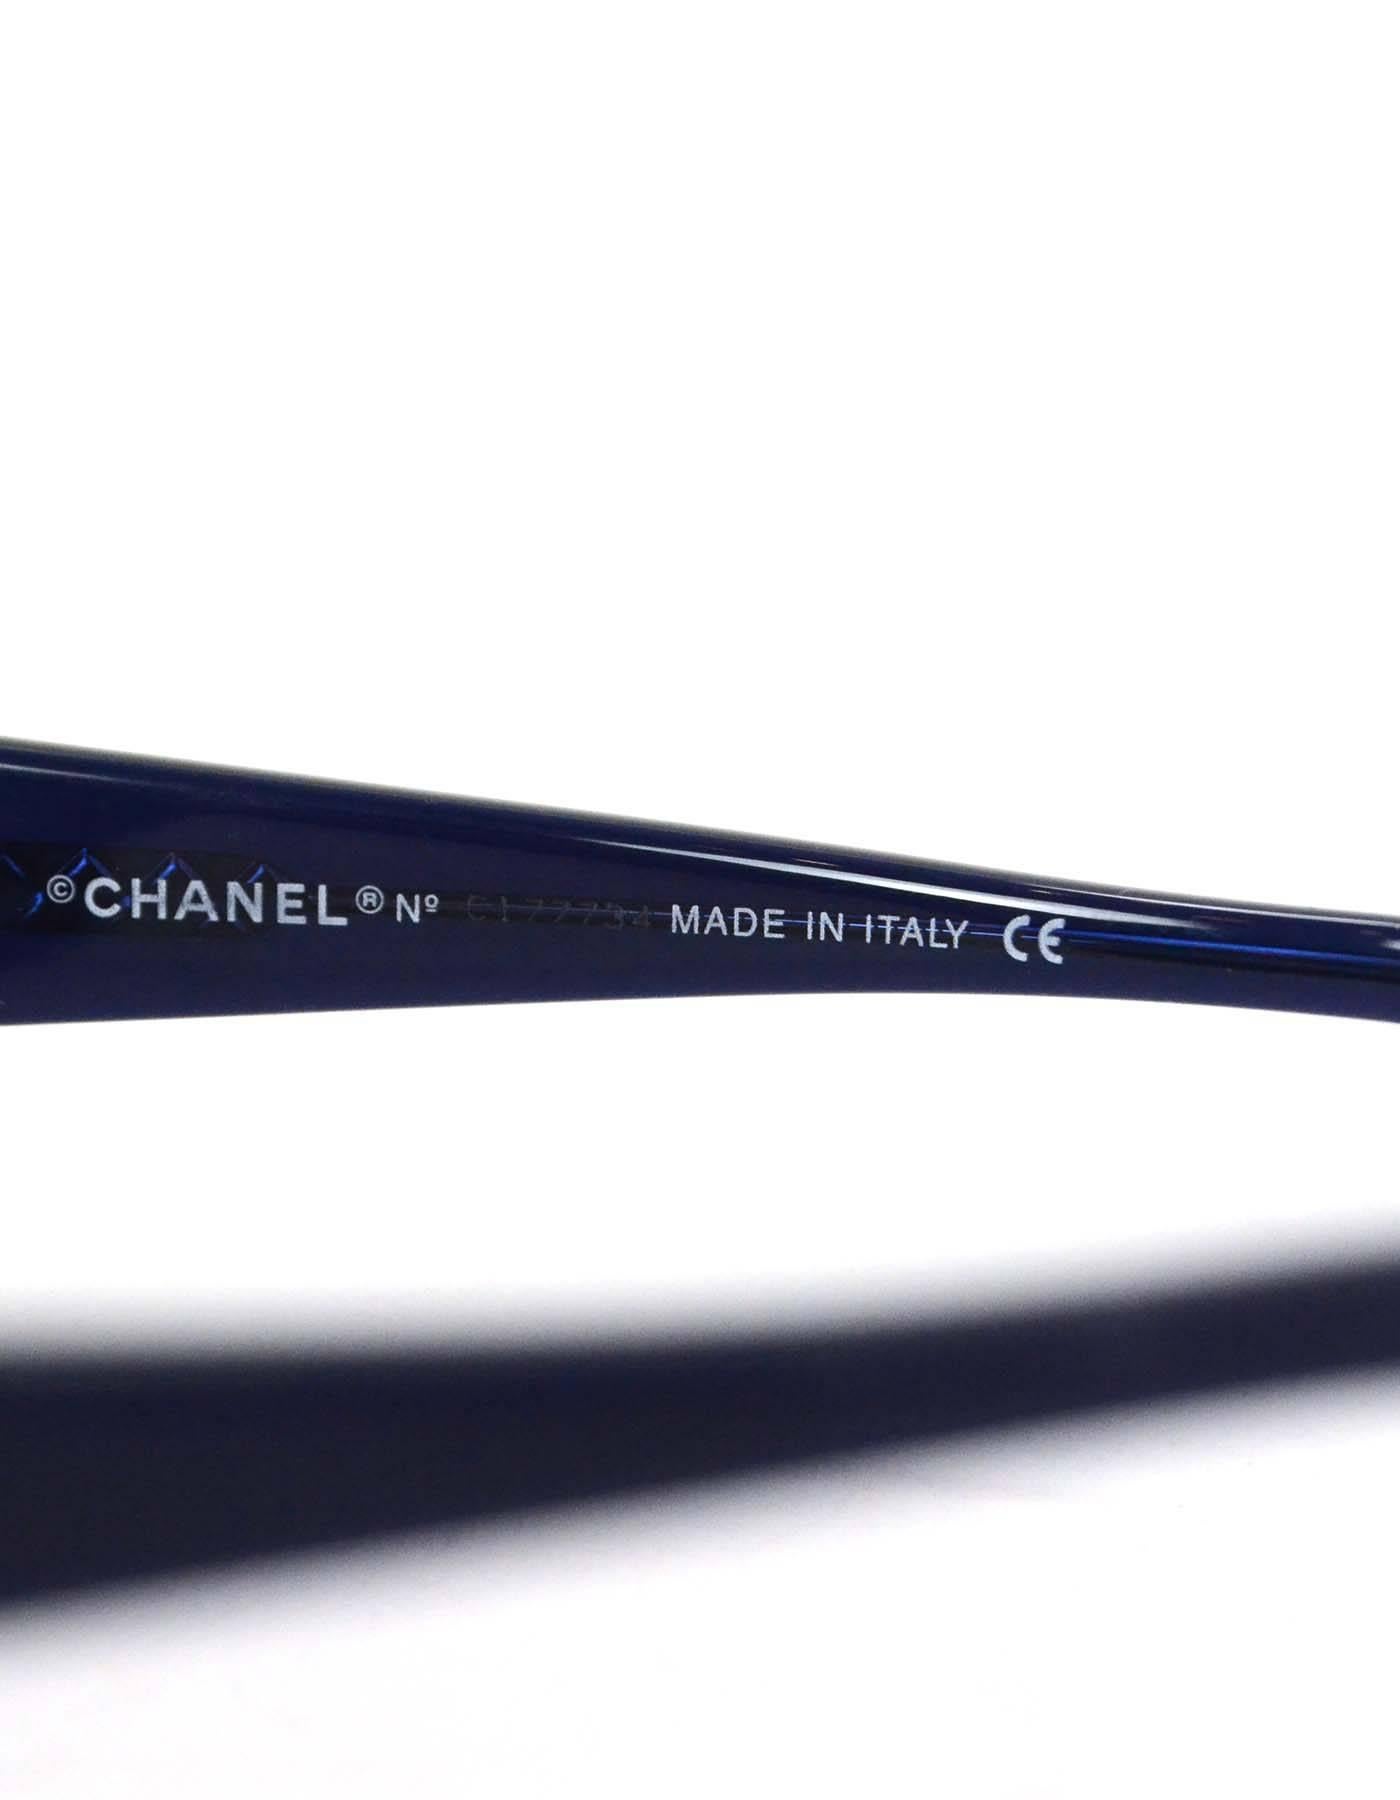 Chanel Blue Sunglasses with CC at Arms 1